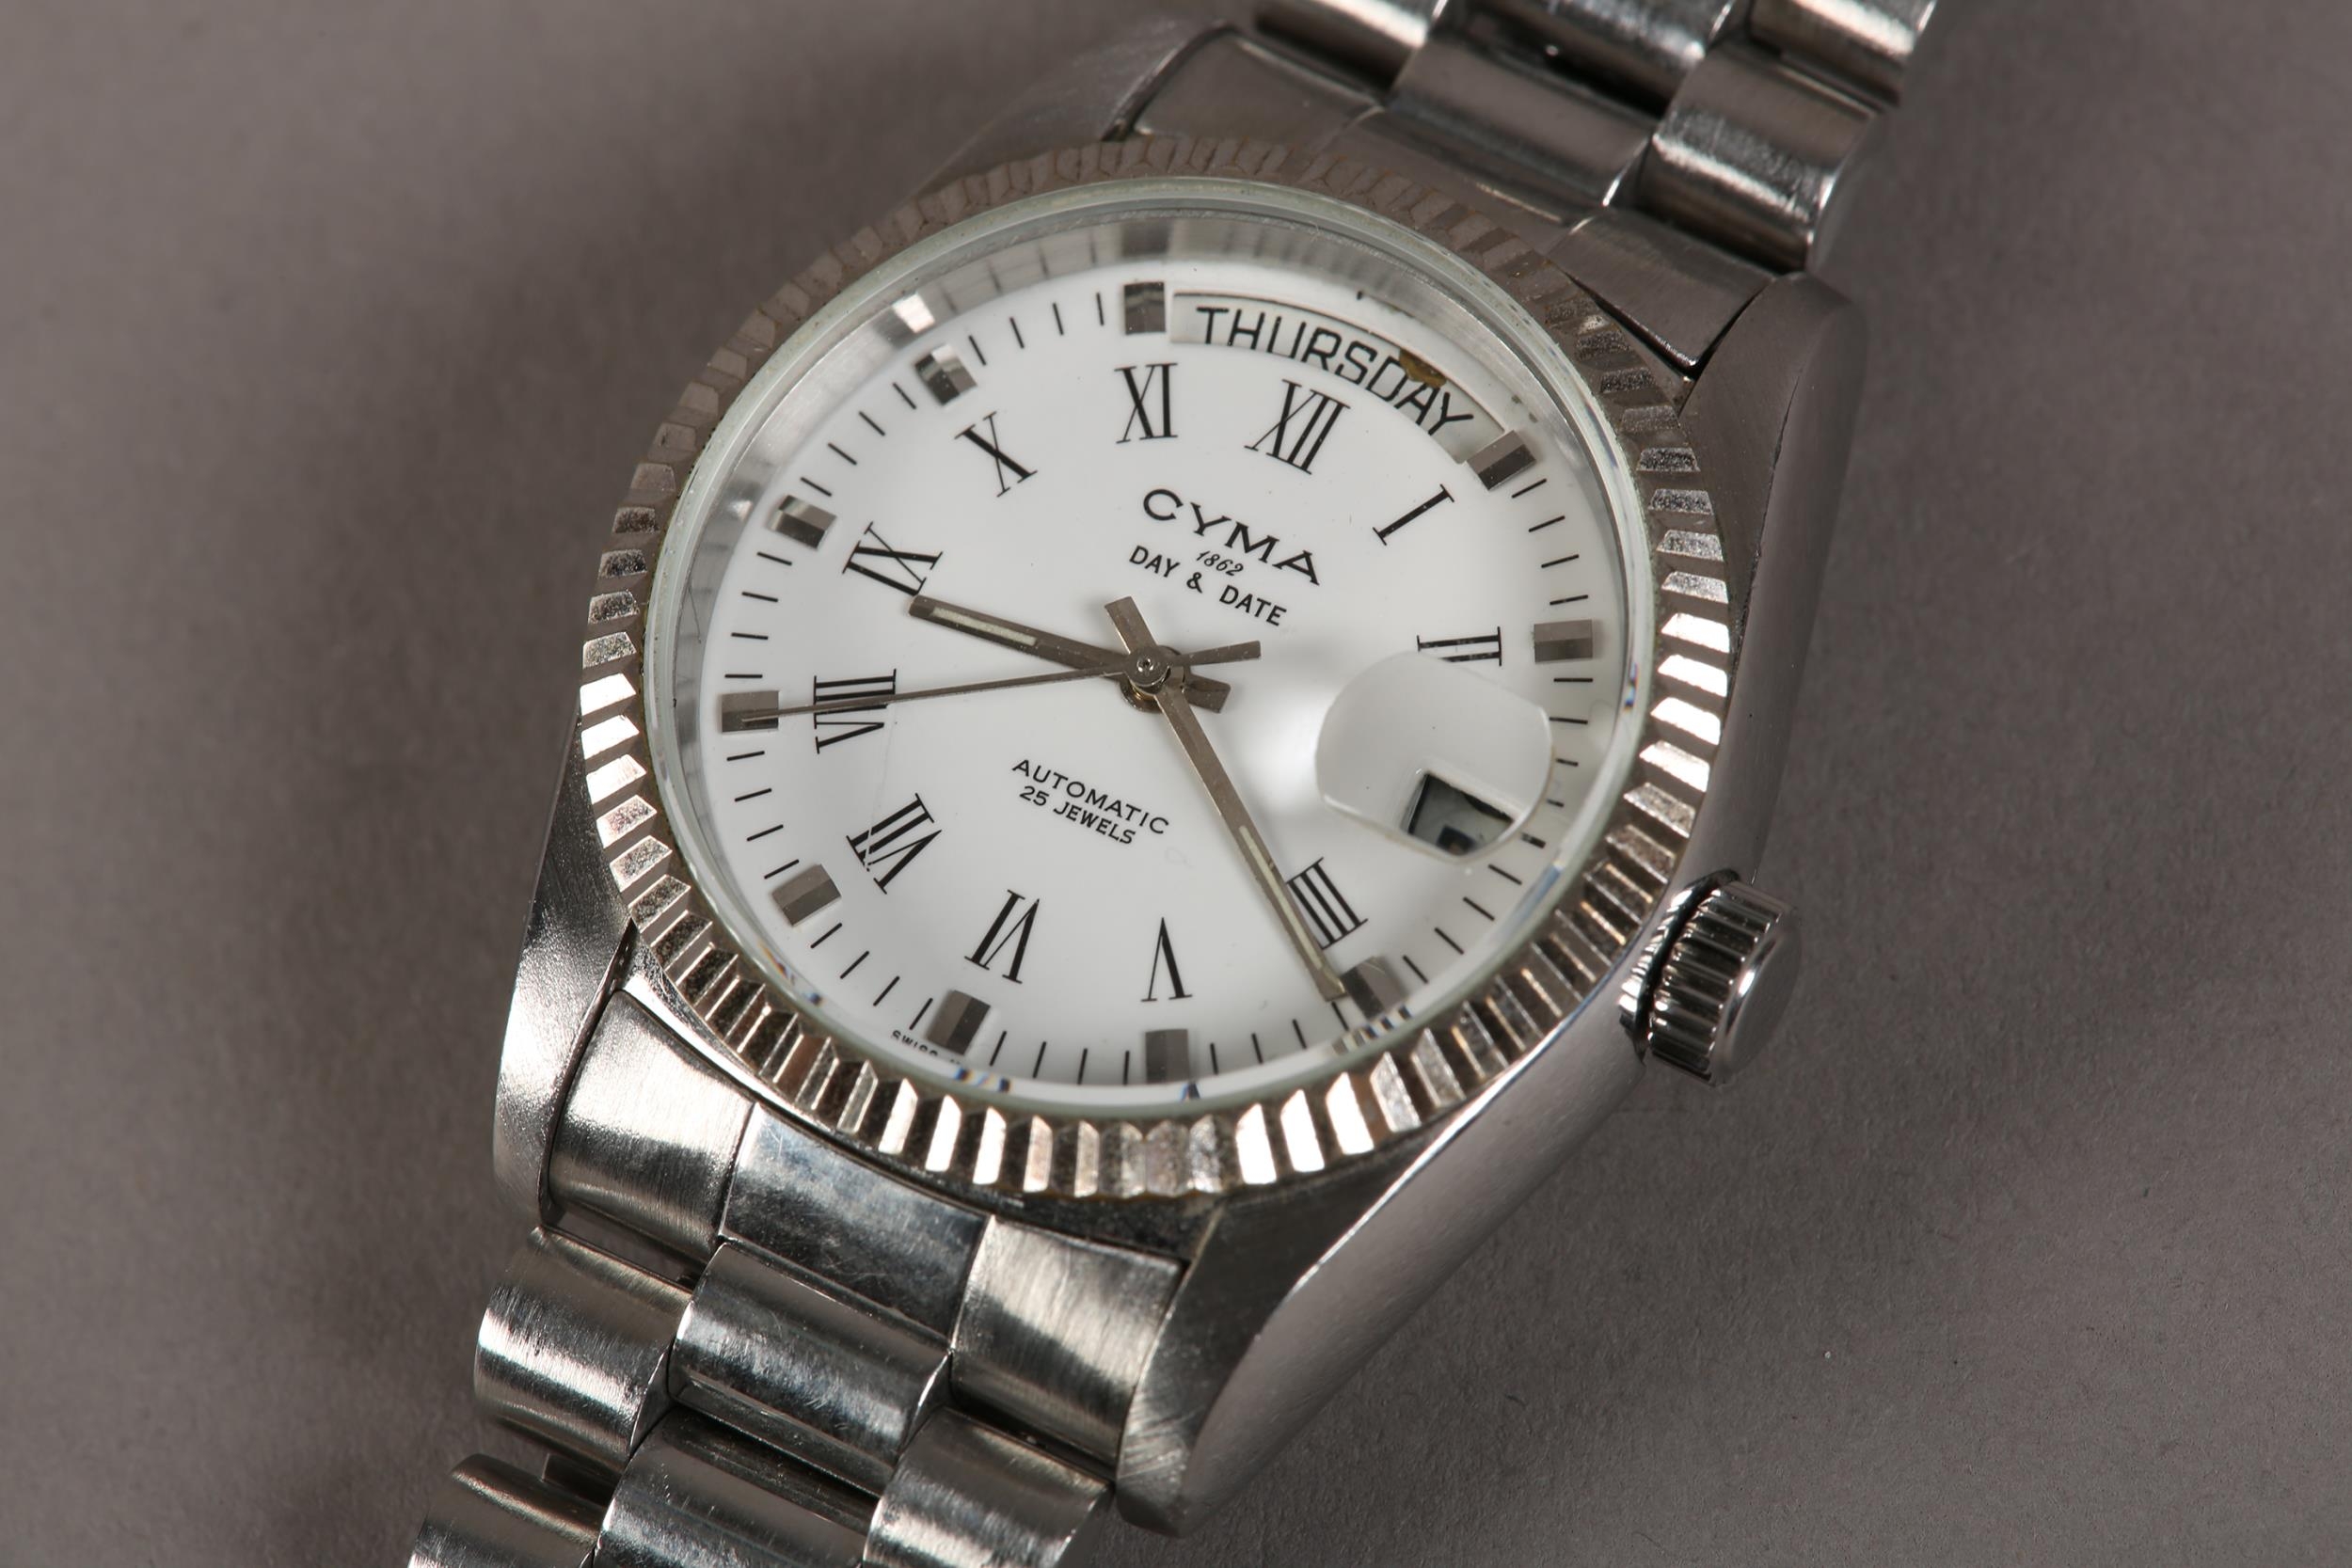 A CYMA GENTLEMAN'S 1862 DAY DATE AUTOMATIC WRISTWATCH in stainless steel, case no. 02-0171-005, 25